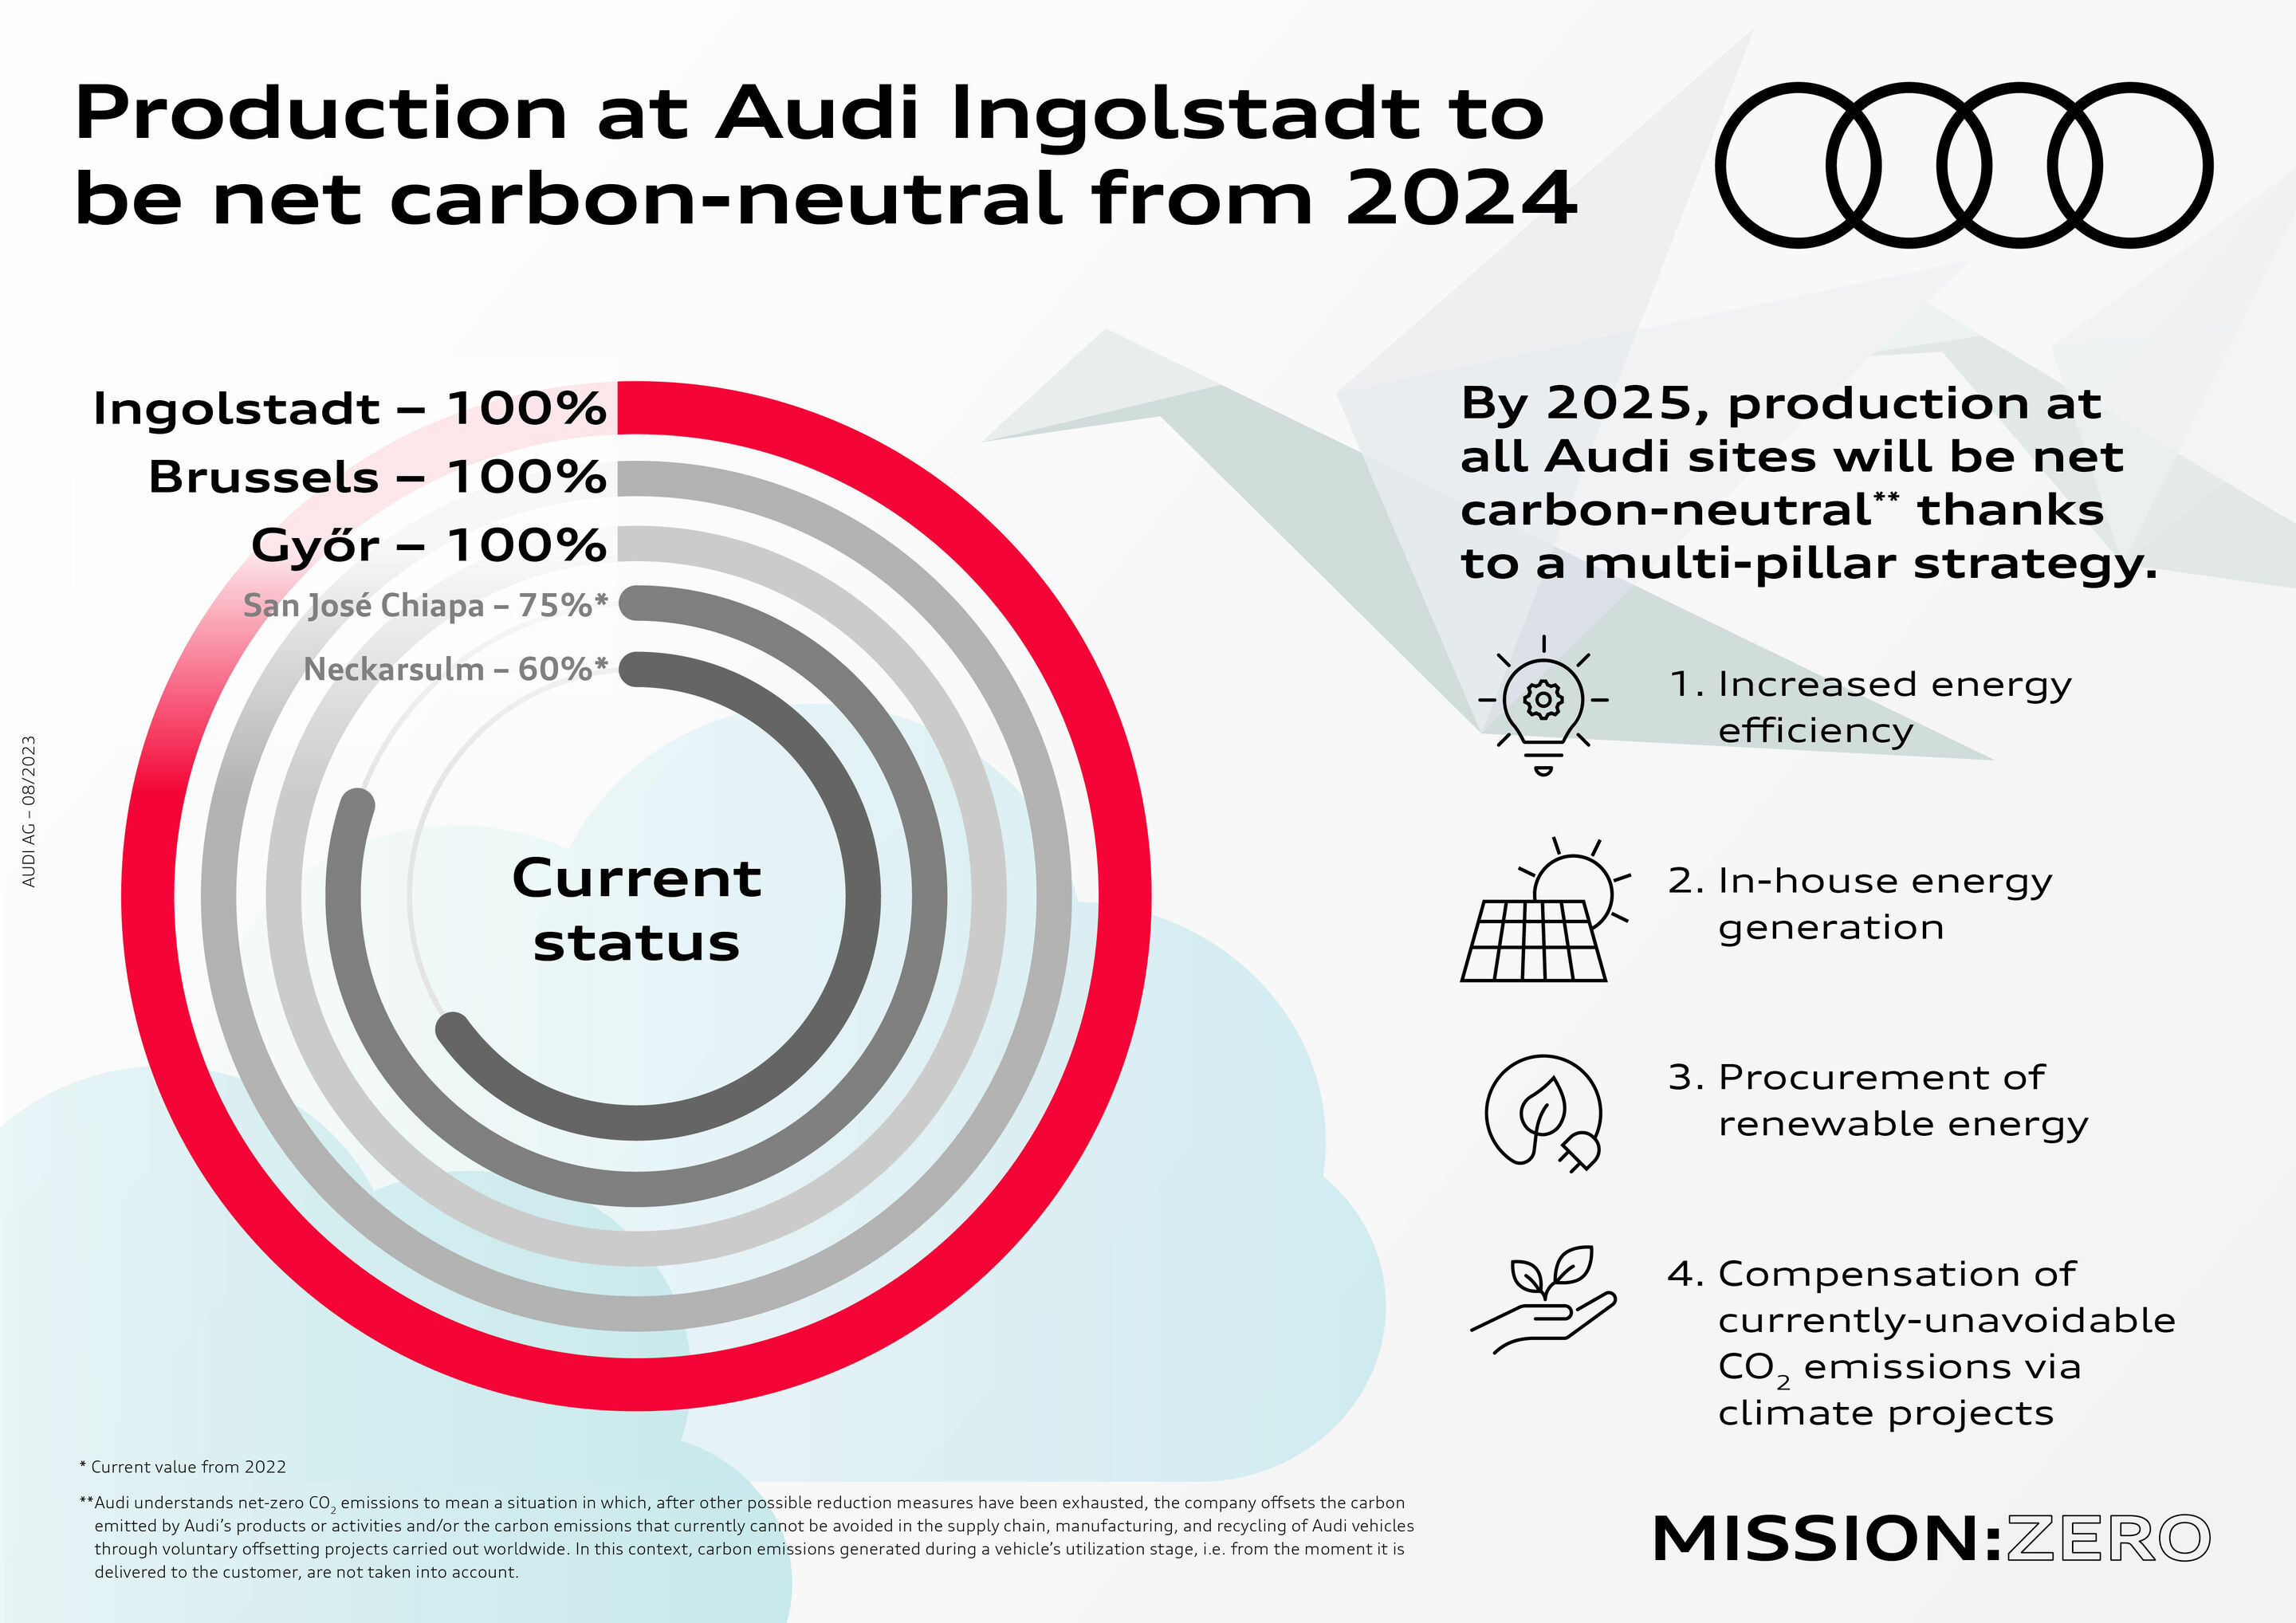 Audi Ingolstadt to achieve net carbon neutral production in 2024